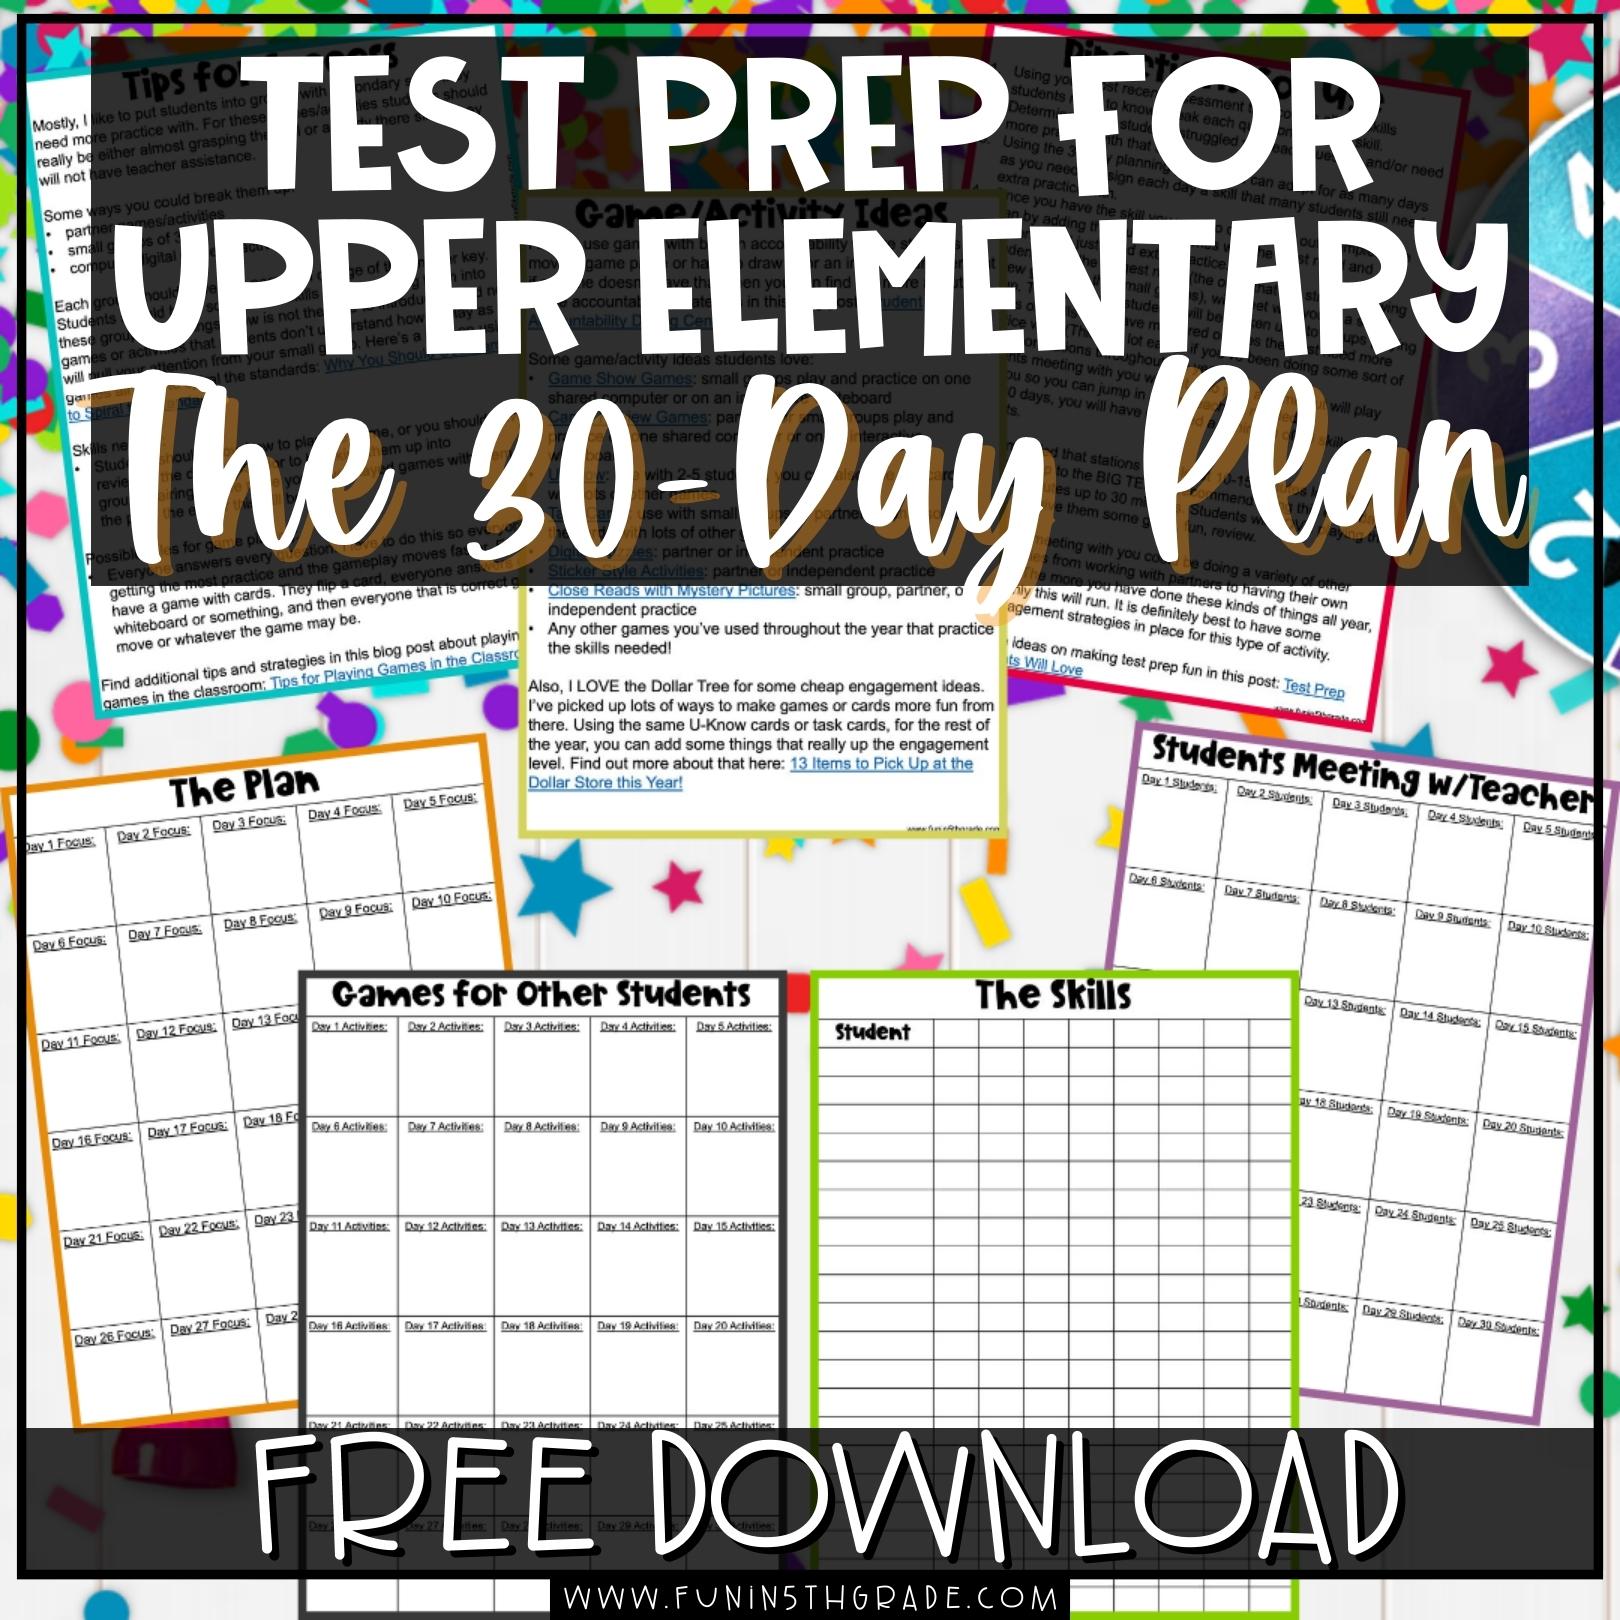 Test Prep for Upper Elementary (The 30-Day Plan) Image with a hand writing on a calendar near a computer